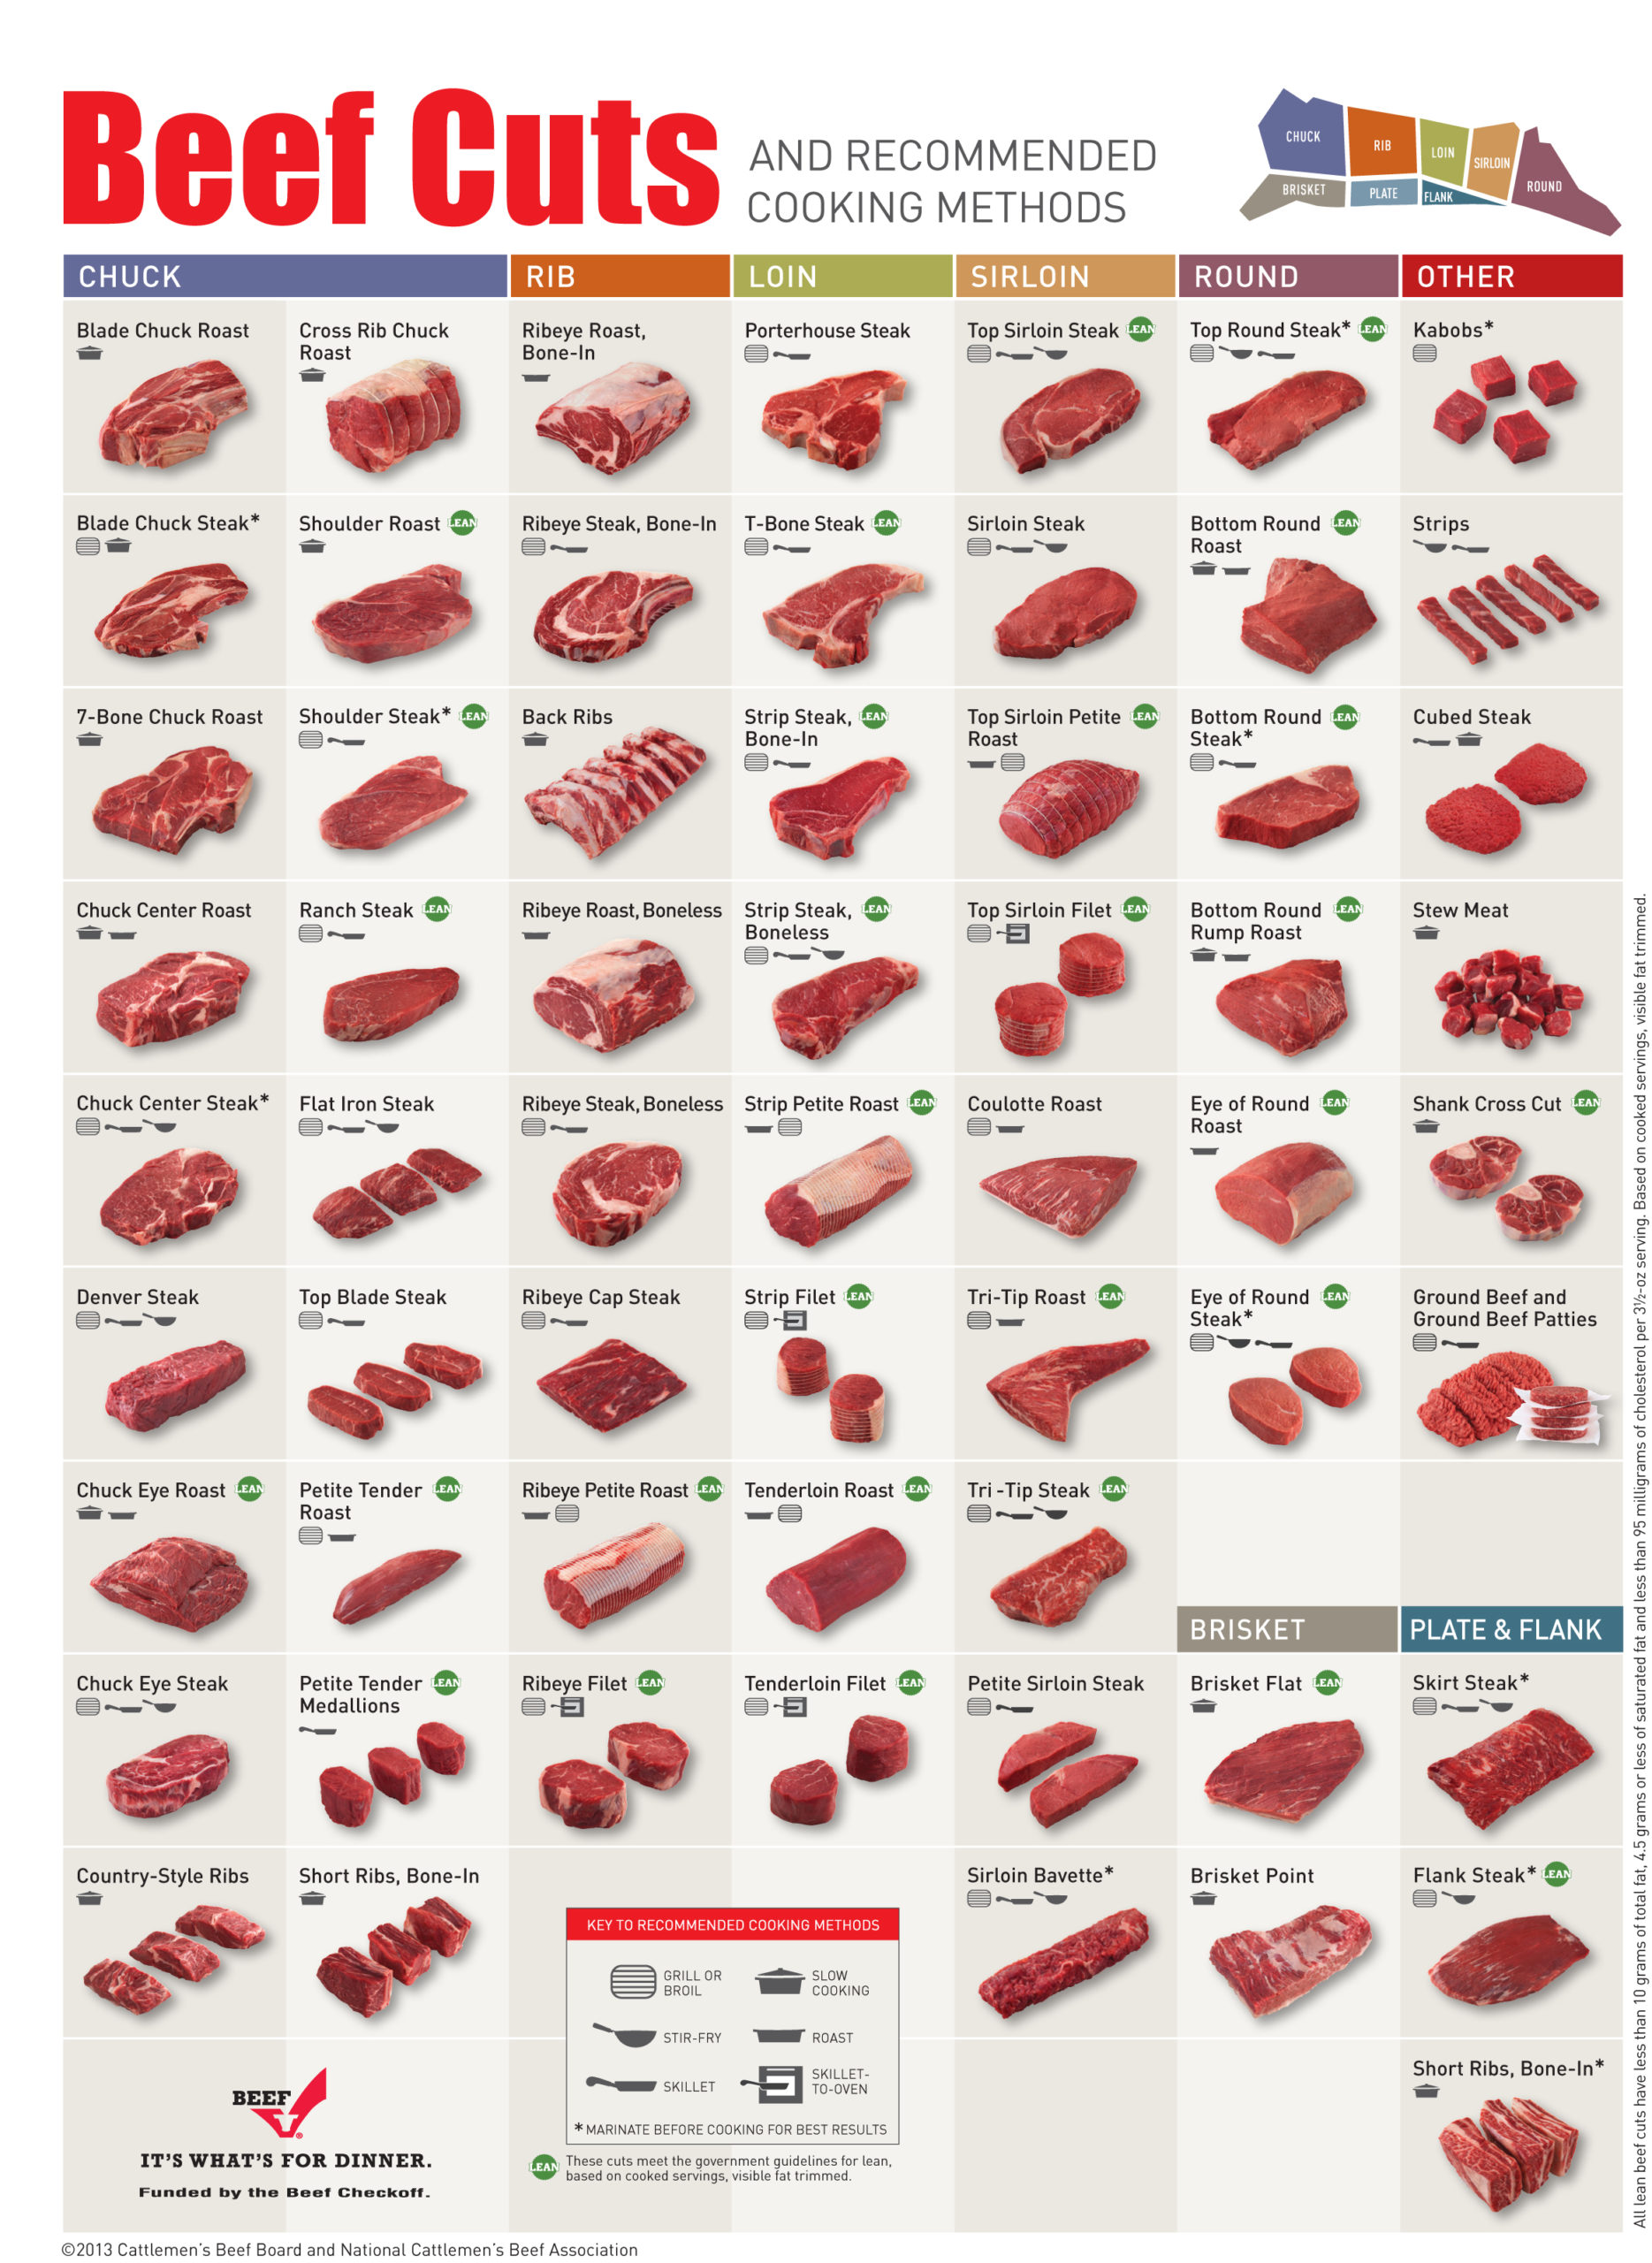 The Best Way To Cook 60 Cuts Of Beef [Infographic]